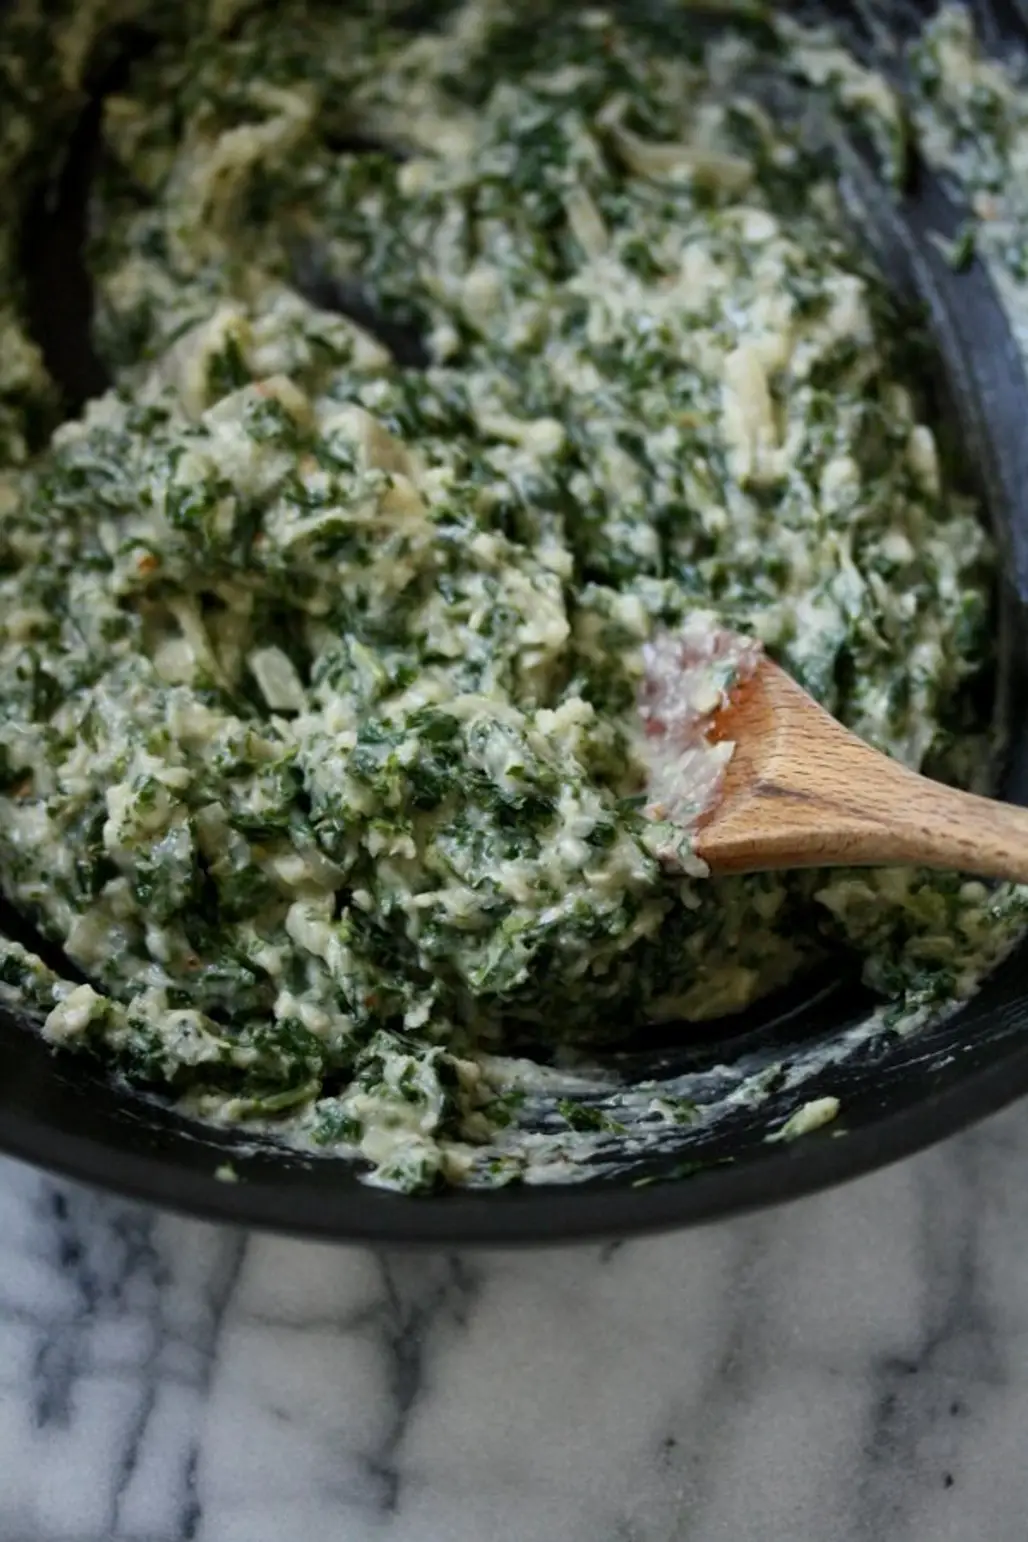 Creamed up Kale – for All You Kale Lovers